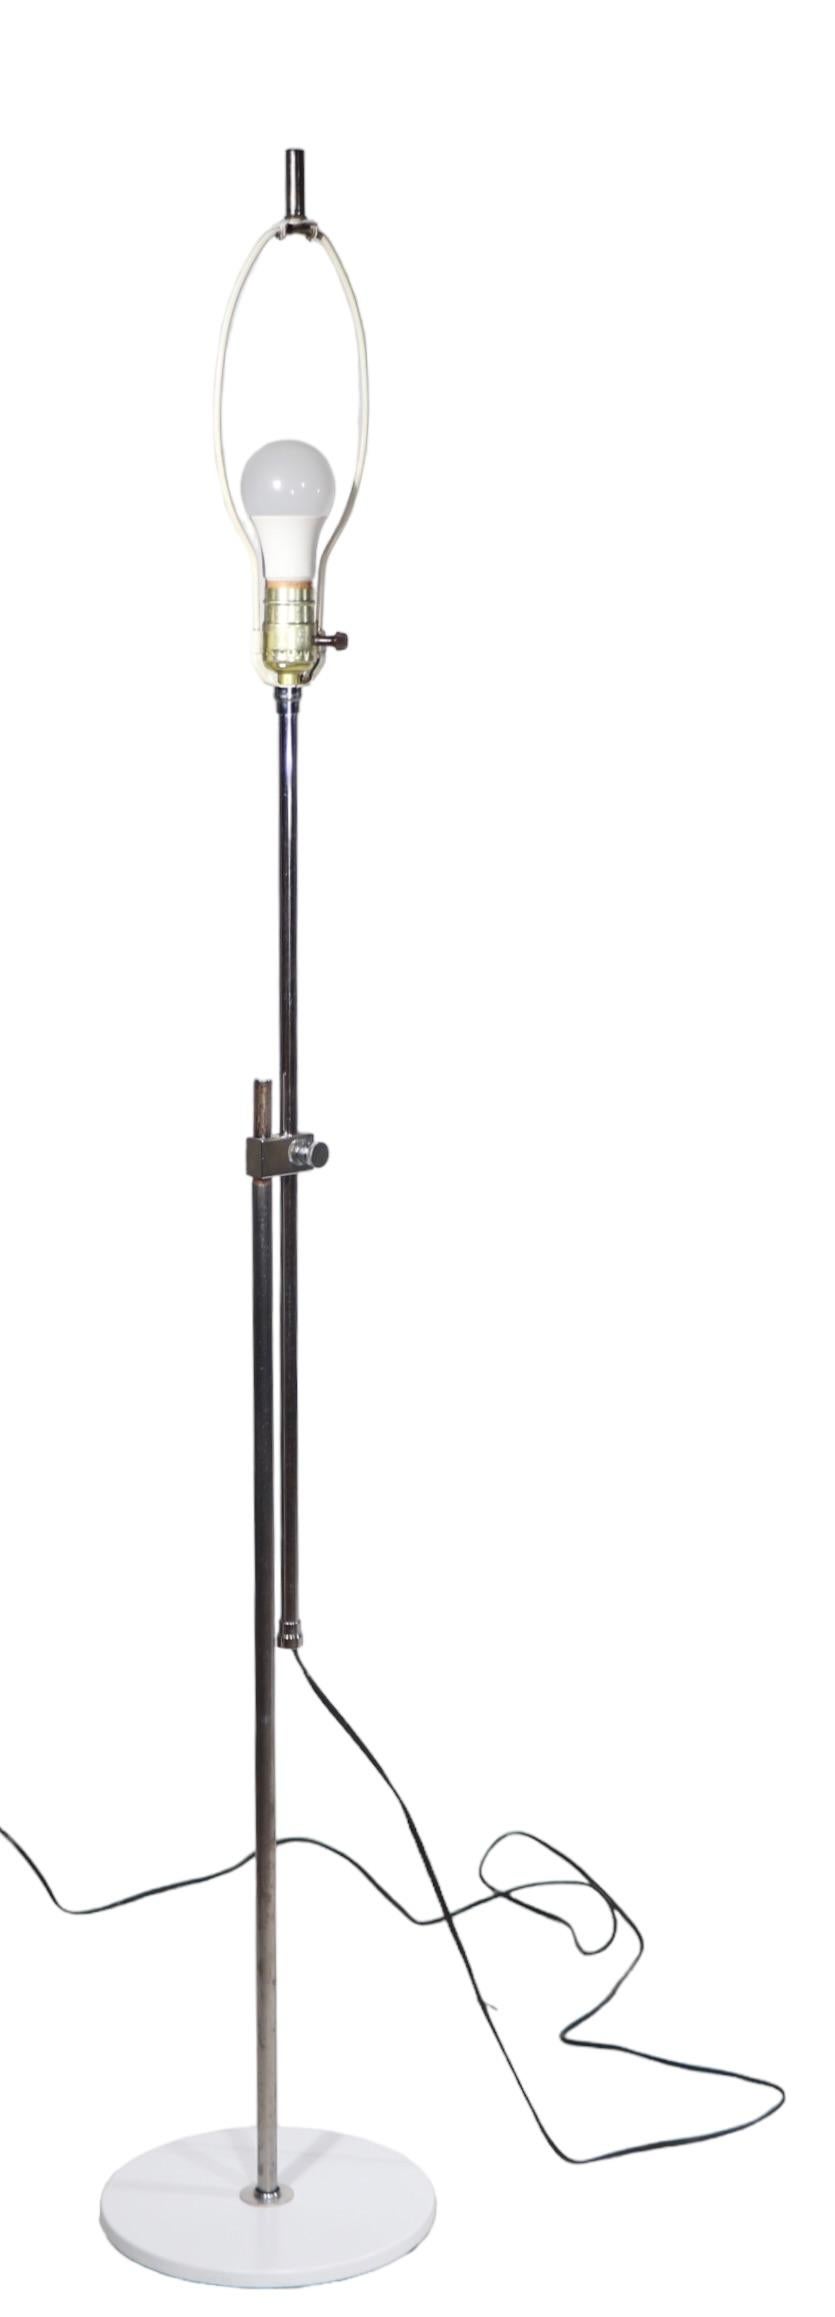 Adjustable Chrome Mid Century  Floor Lamp c 1960/1970's  In Good Condition For Sale In New York, NY